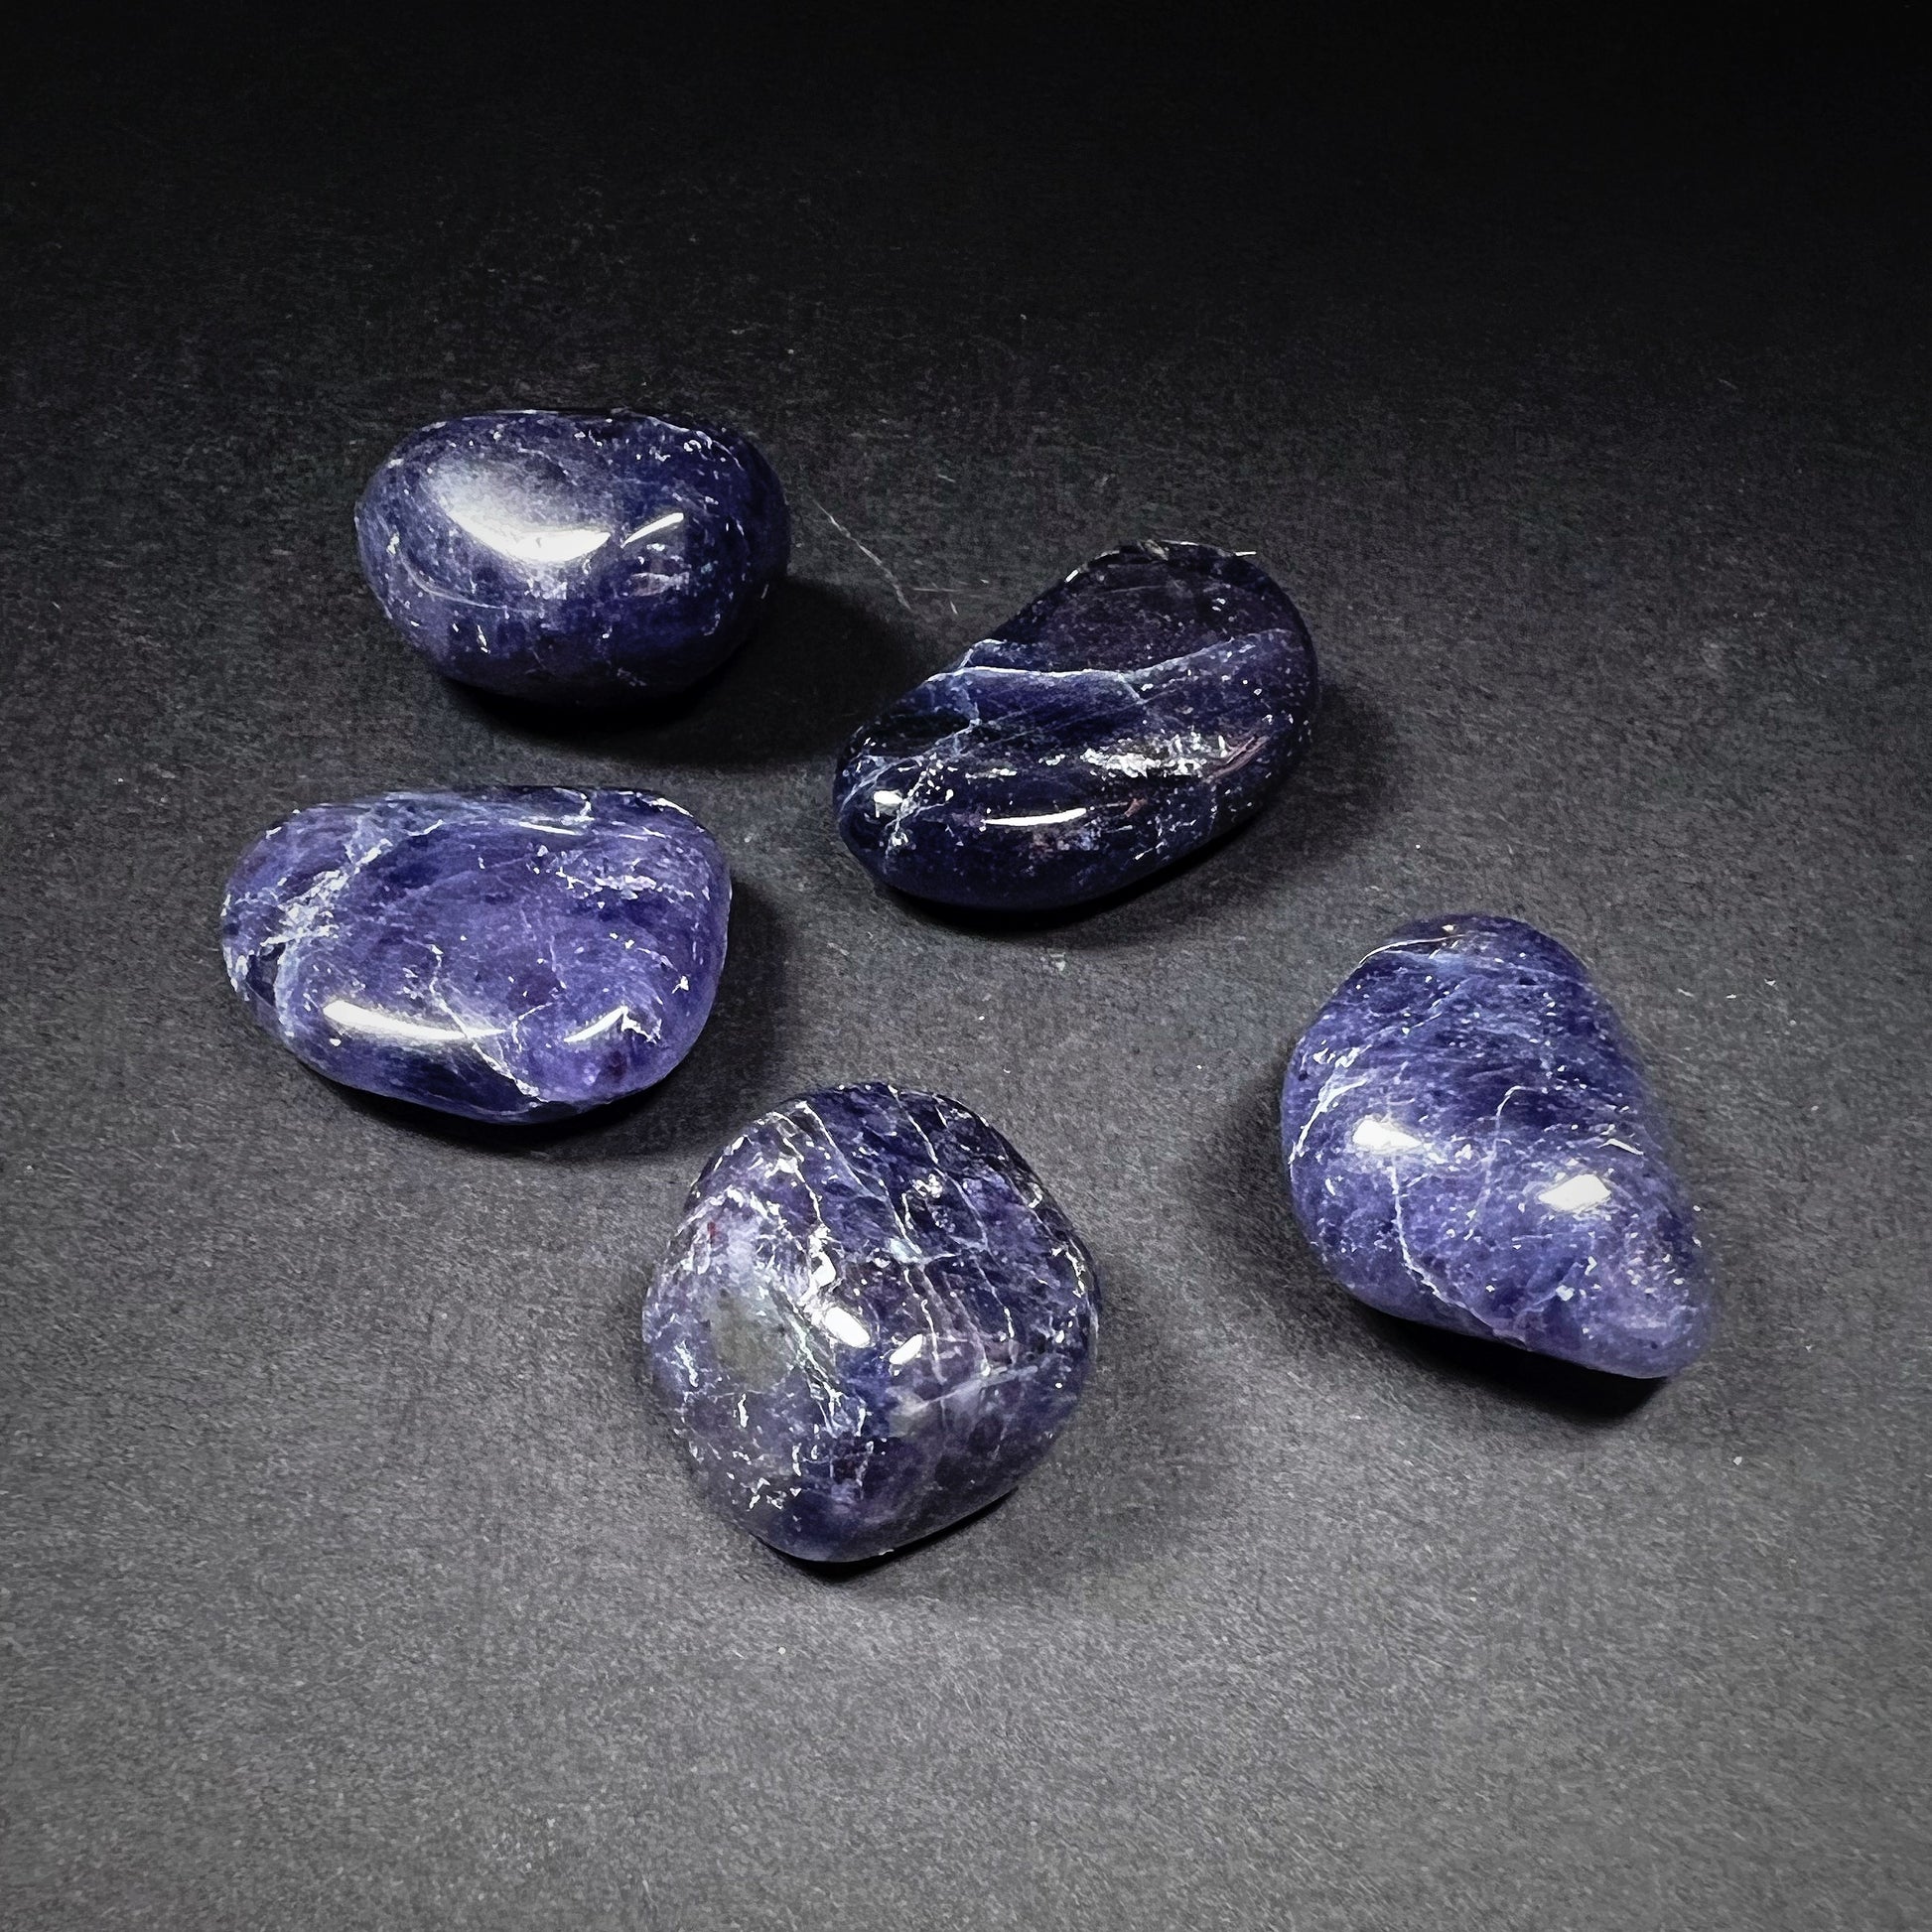 Tumbled iolite stones. Colored blue and violet with white stripes.